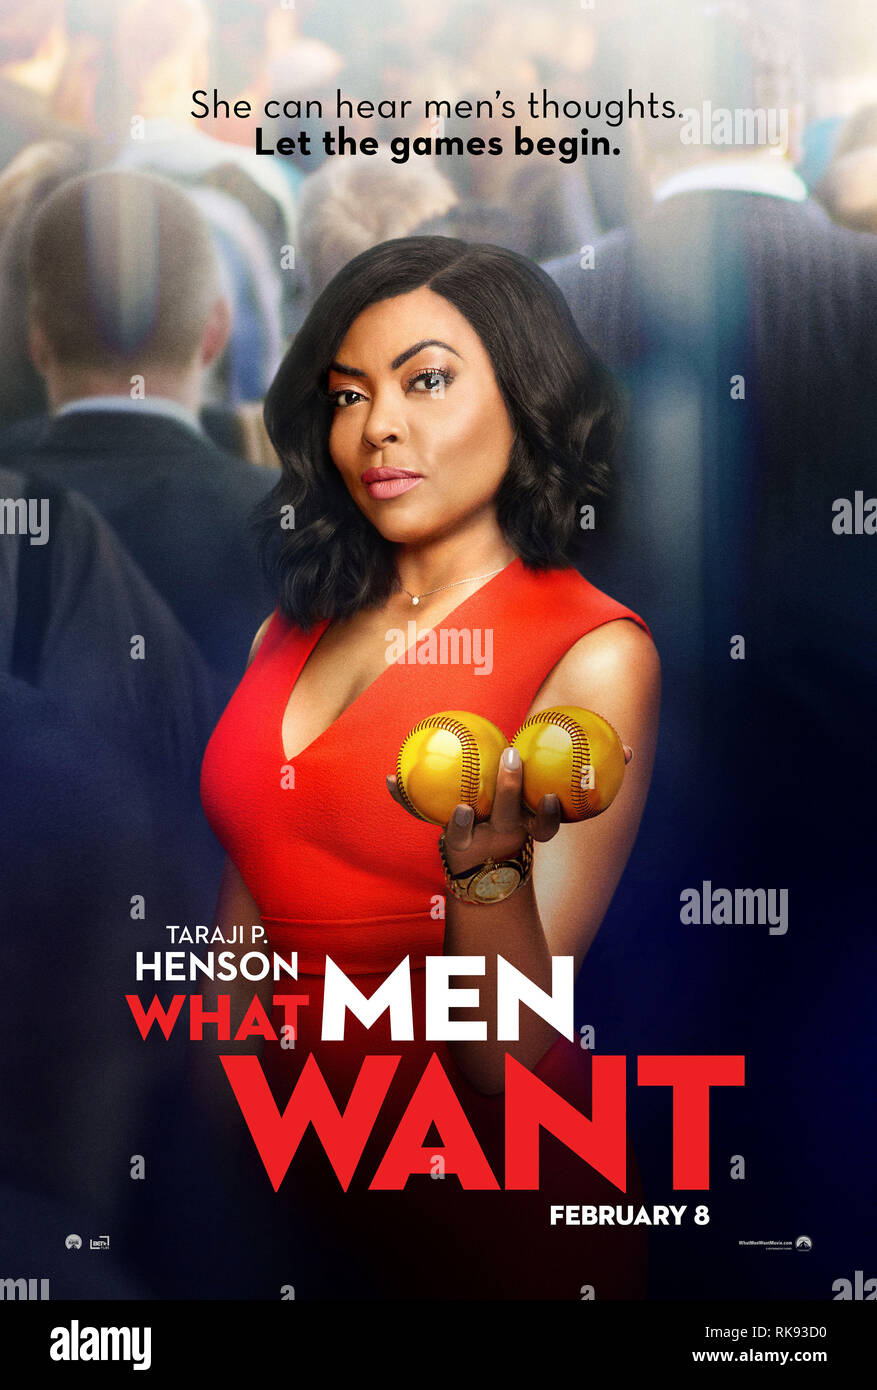 RELEASE DATE: February 8, 2019 TITLE: What Men Want STUDIO: Paramount Pictures DIRECTOR: Adam Shankman PLOT: A woman is boxed out by the male sports agents in her profession, but gains an unexpected edge over them when she develops the ability to hear men's thoughts. STARRING: TARAJI P. HENSON as Ali Davis poster art. (Credit Image: © Paramount Pictures/Entertainment Pictures) Stock Photo